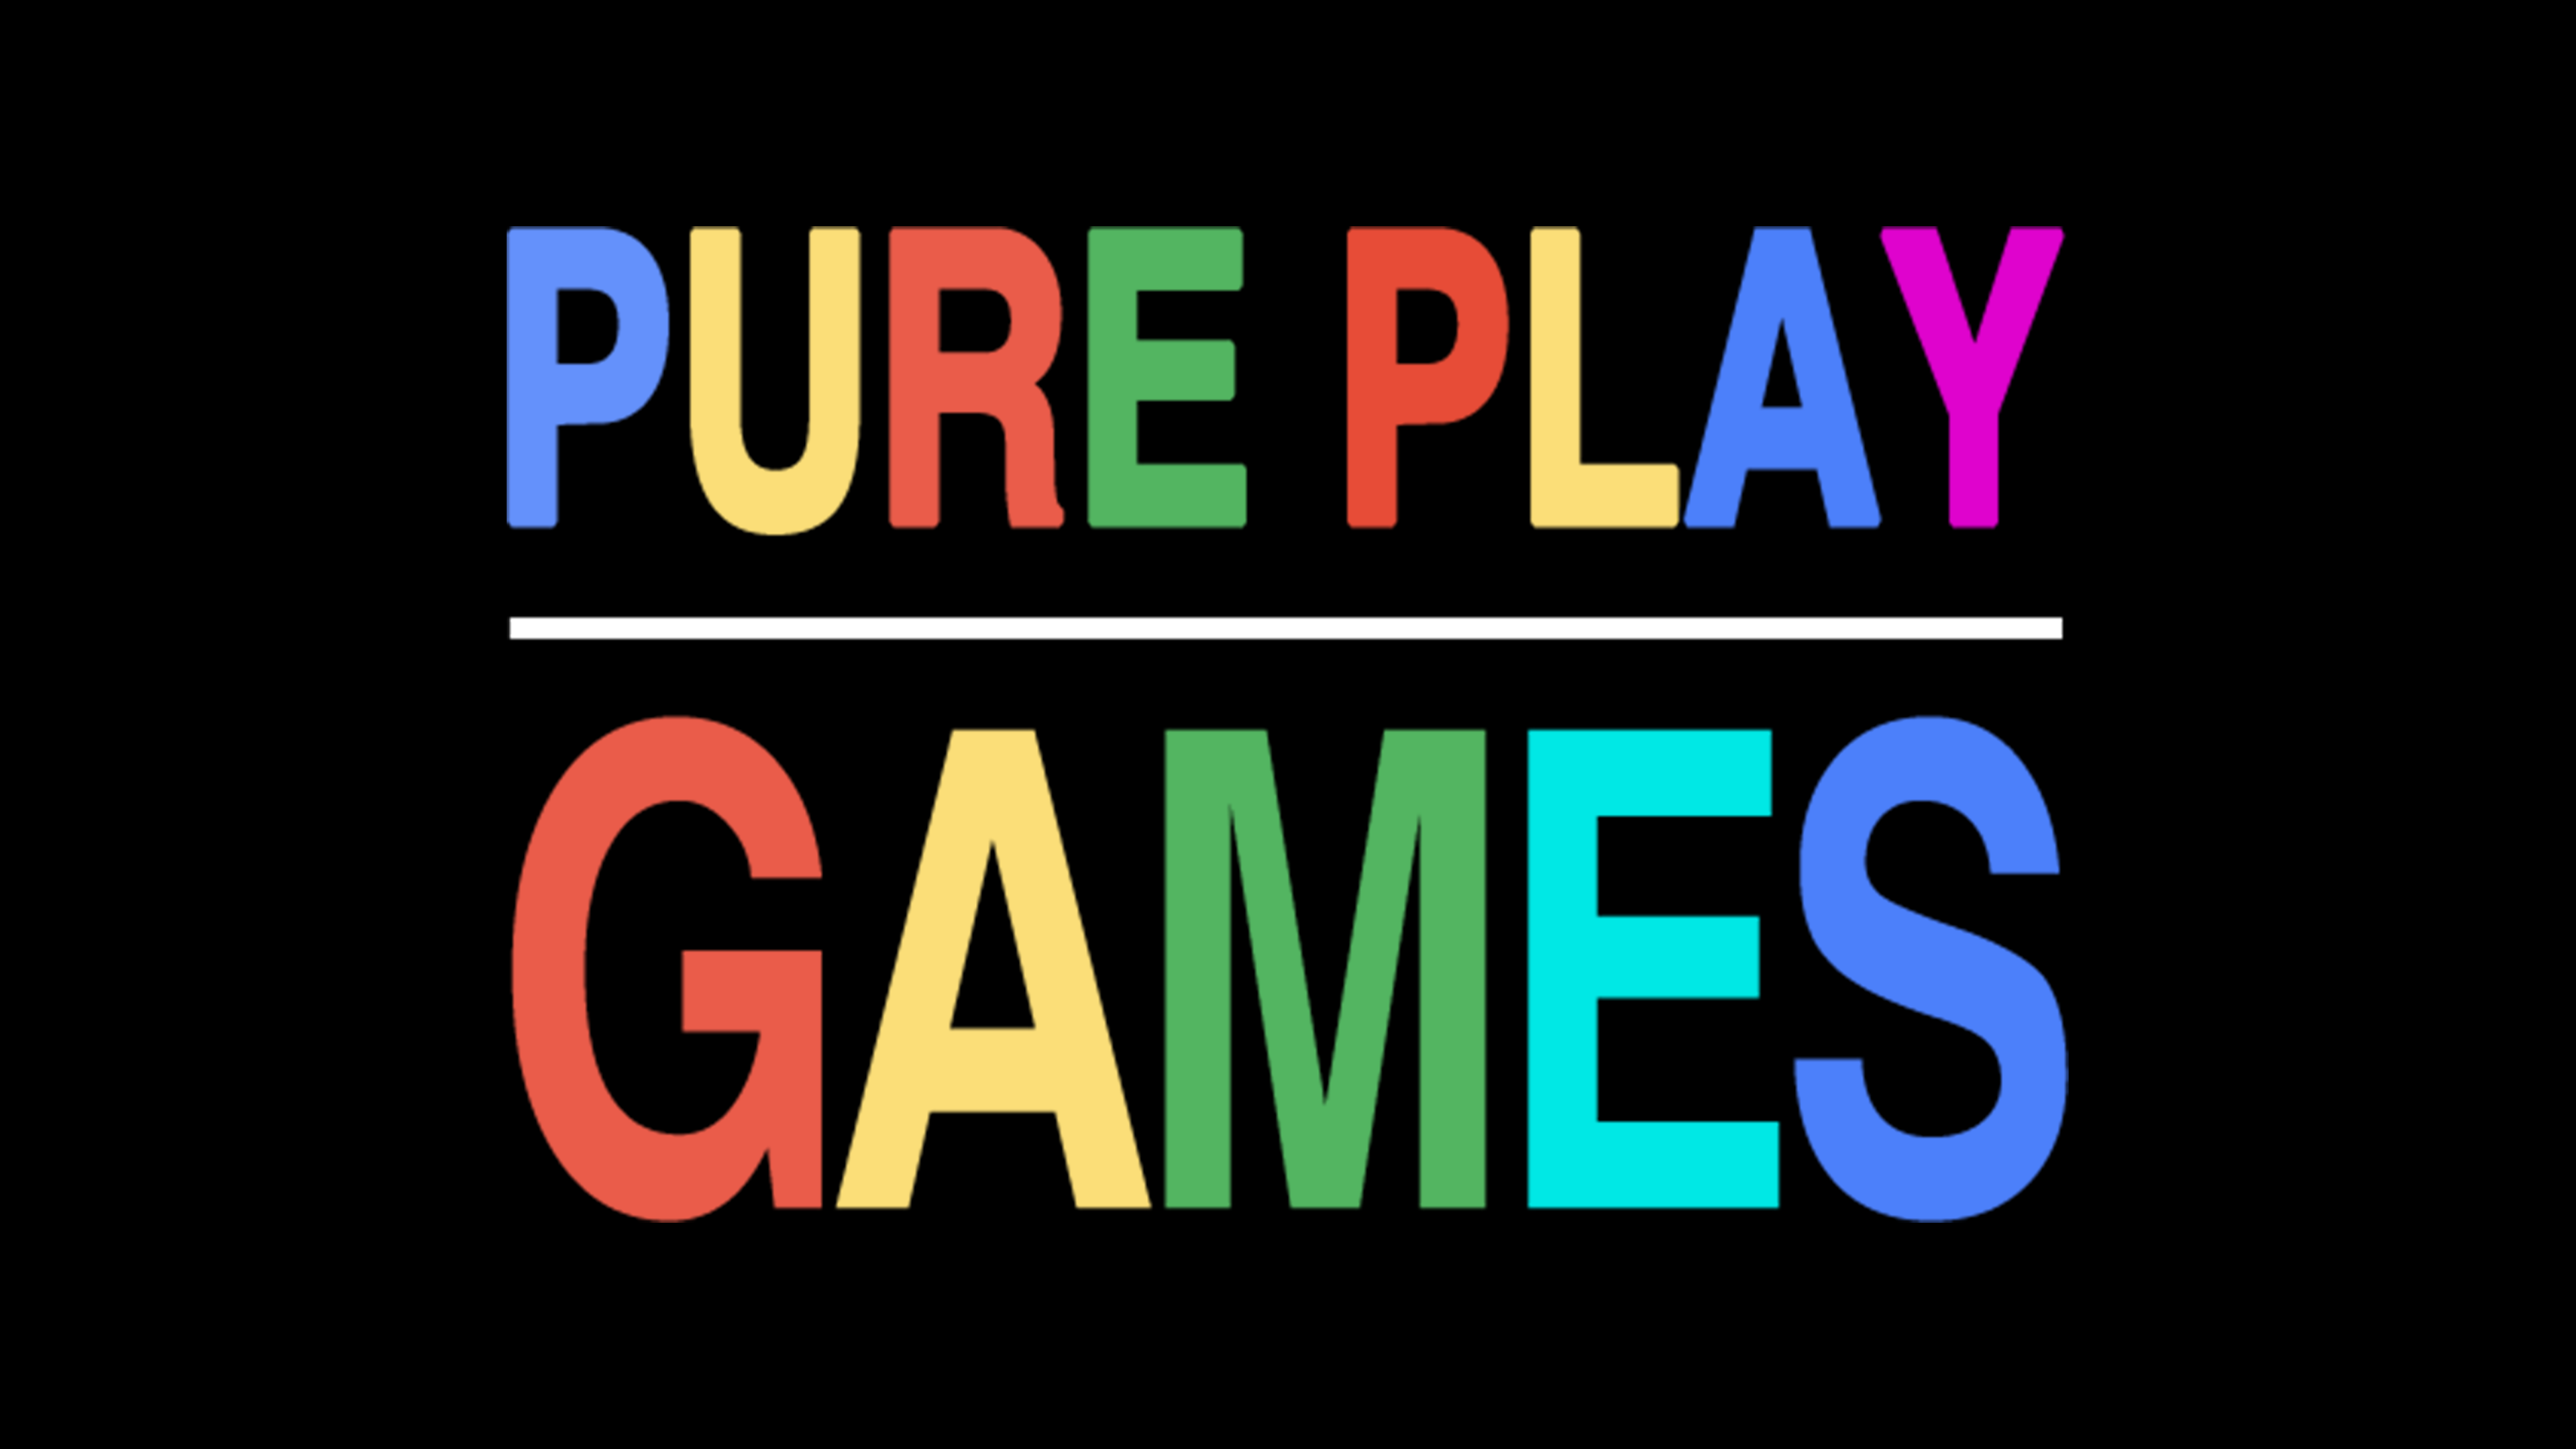 difficult games for boys - Apps on Google Play